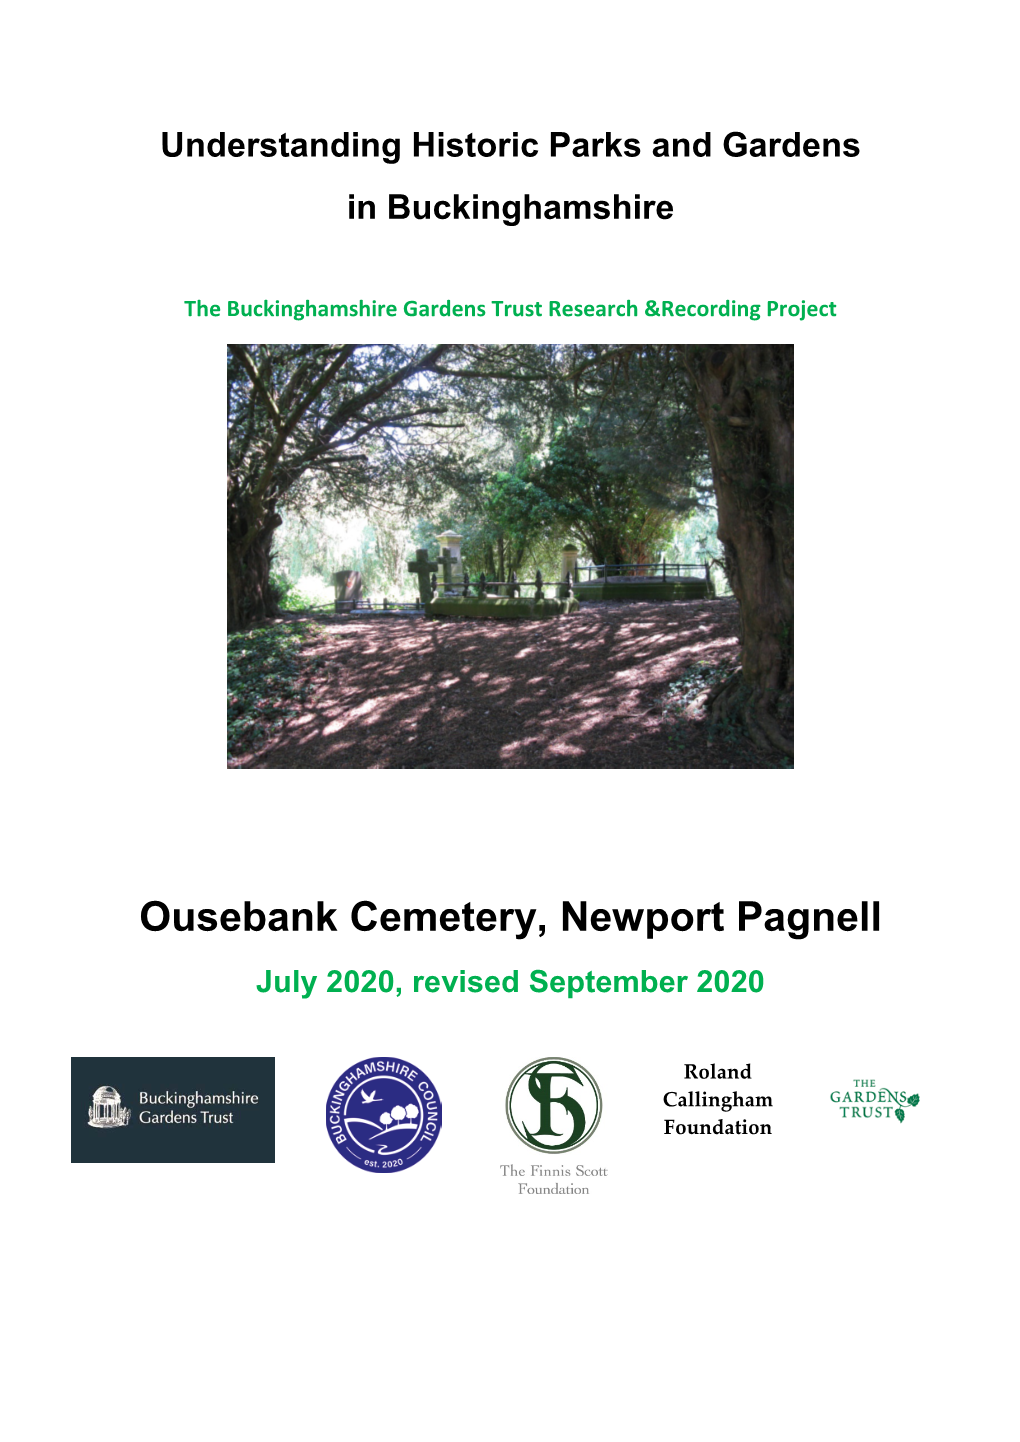 Ousebank Cemetery, Newport Pagnell July 2020, Revised September 2020